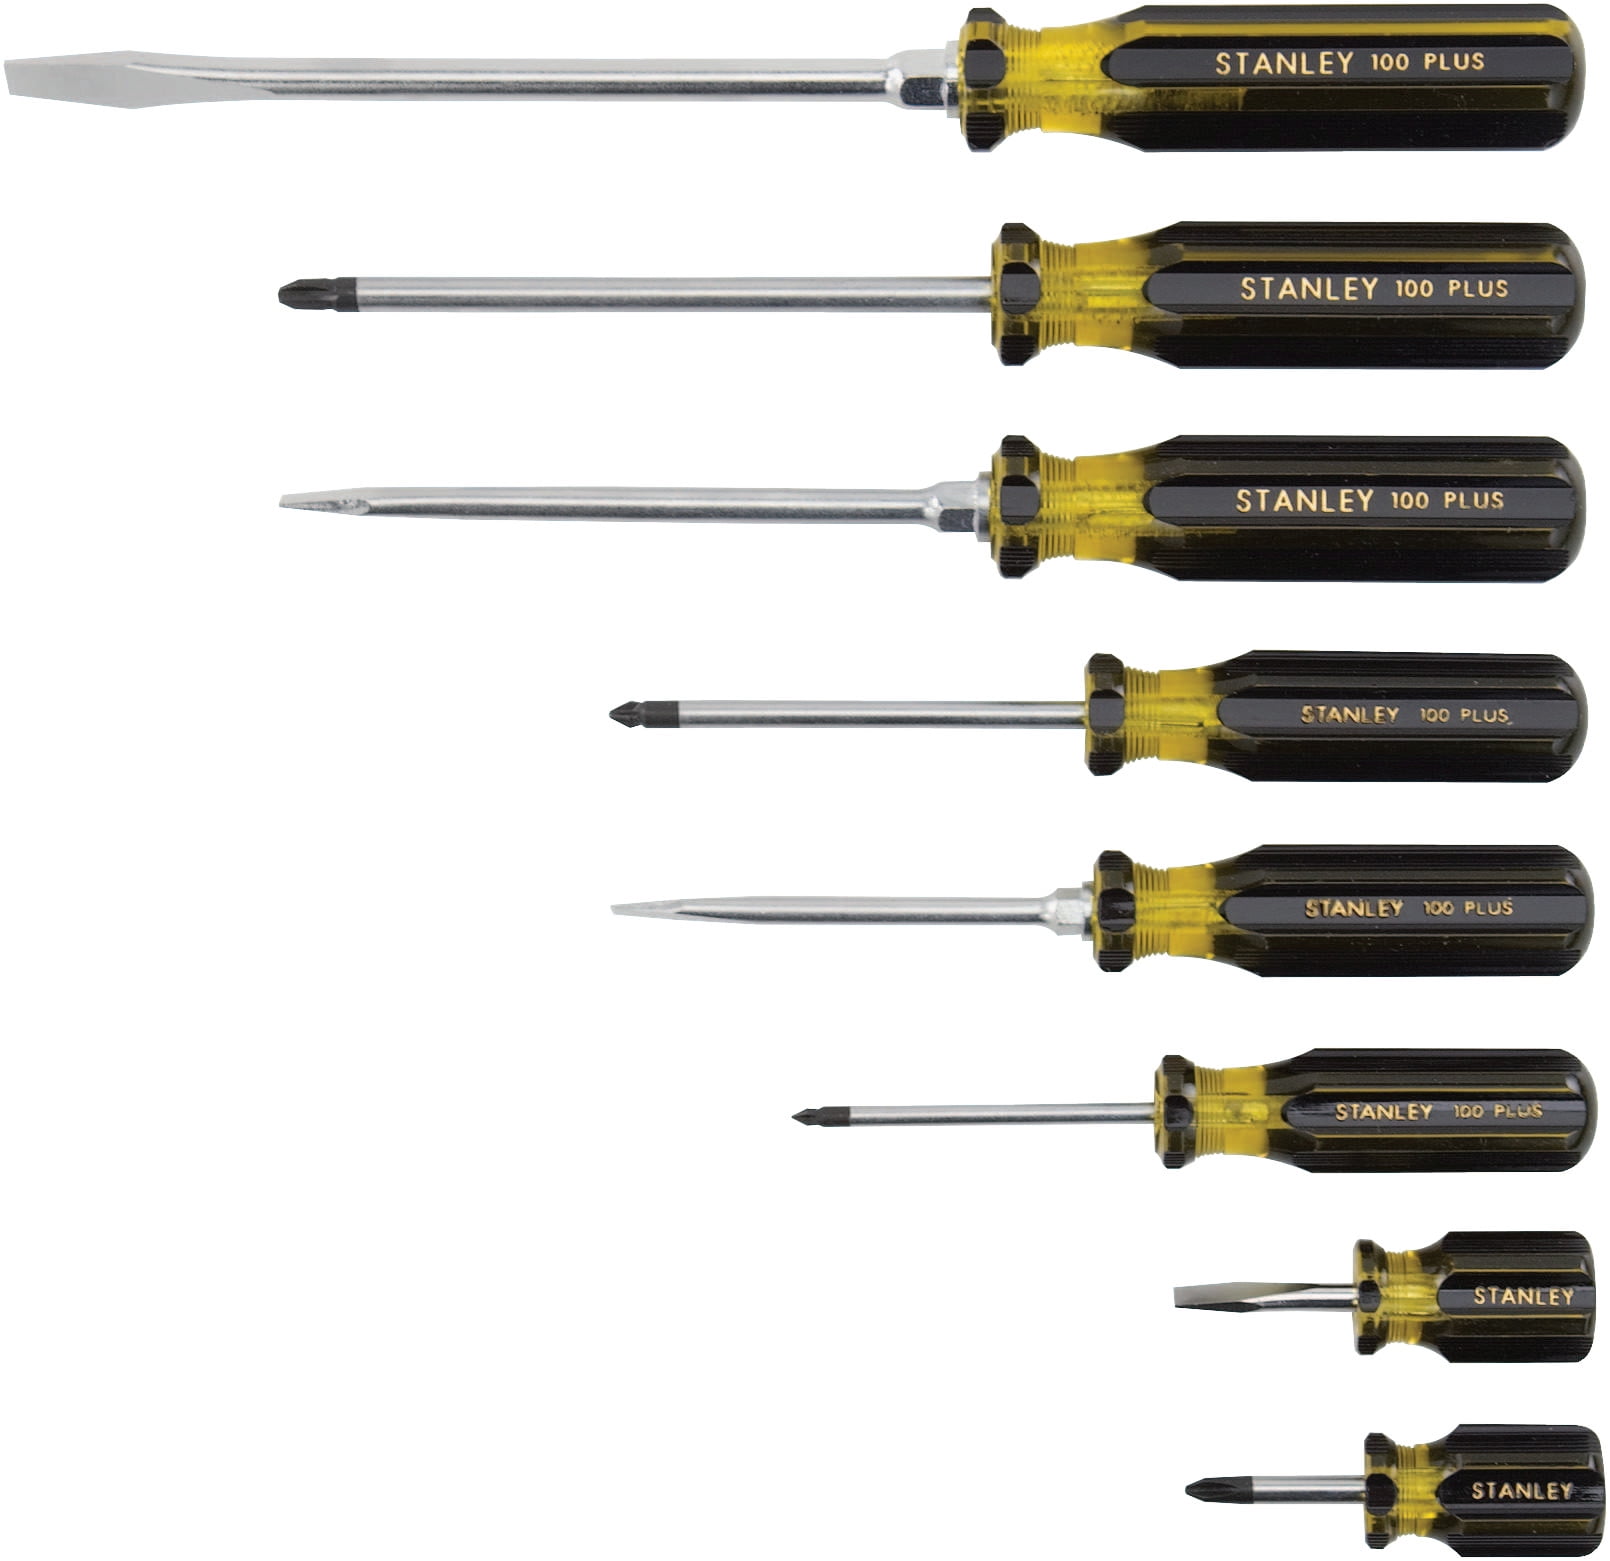 Stanley 100 Plus 8 Pc Combination Screwdriver Sets, Phillips; Slotted